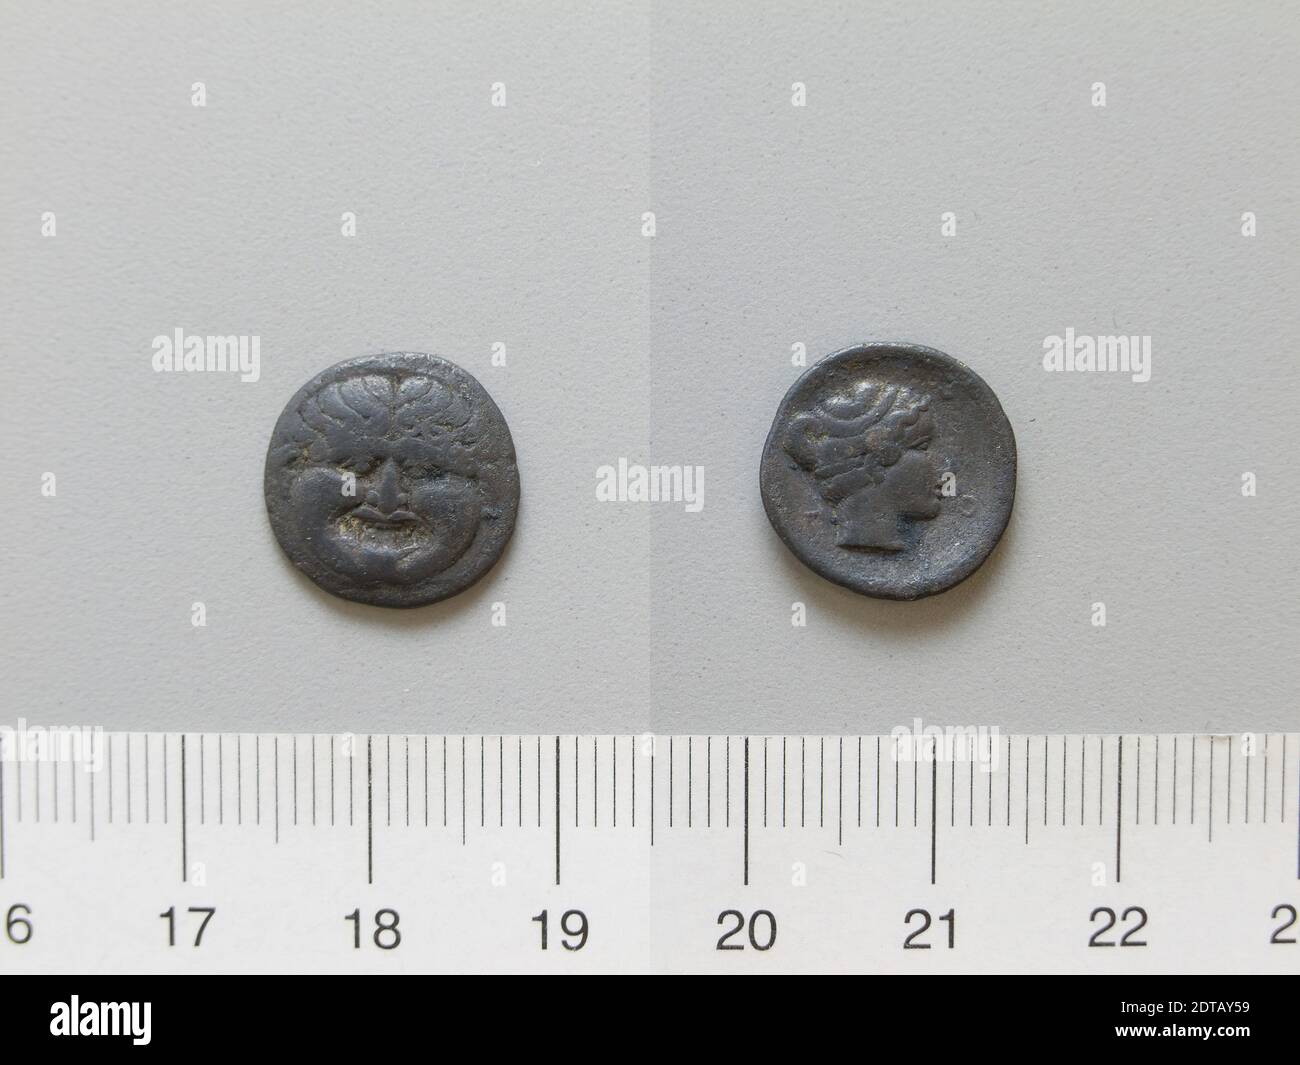 Mint: Neapolis, Coin from Neapolis, 411–350 B.C., Copper, 1.59 g, 3:00, 13.5 mm, Made in Neapolis, Macedonia, Greek, 5th–4th century B.C., Numismatics Stock Photo